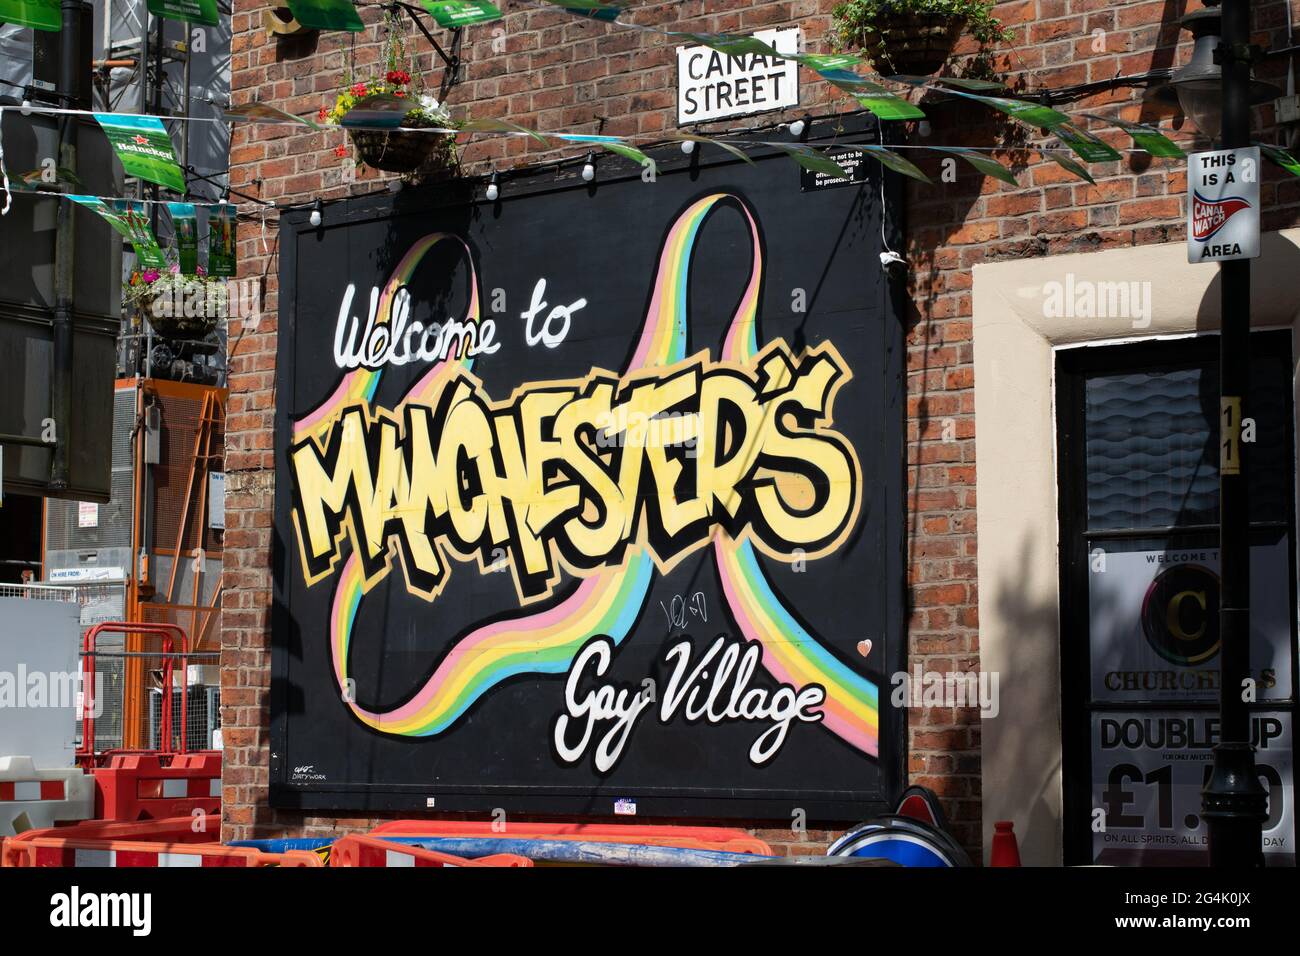 Canal Street, Manchester. Sign text Welcome to Manchester's Gay Village on the side of Churchills bar. Stock Photo